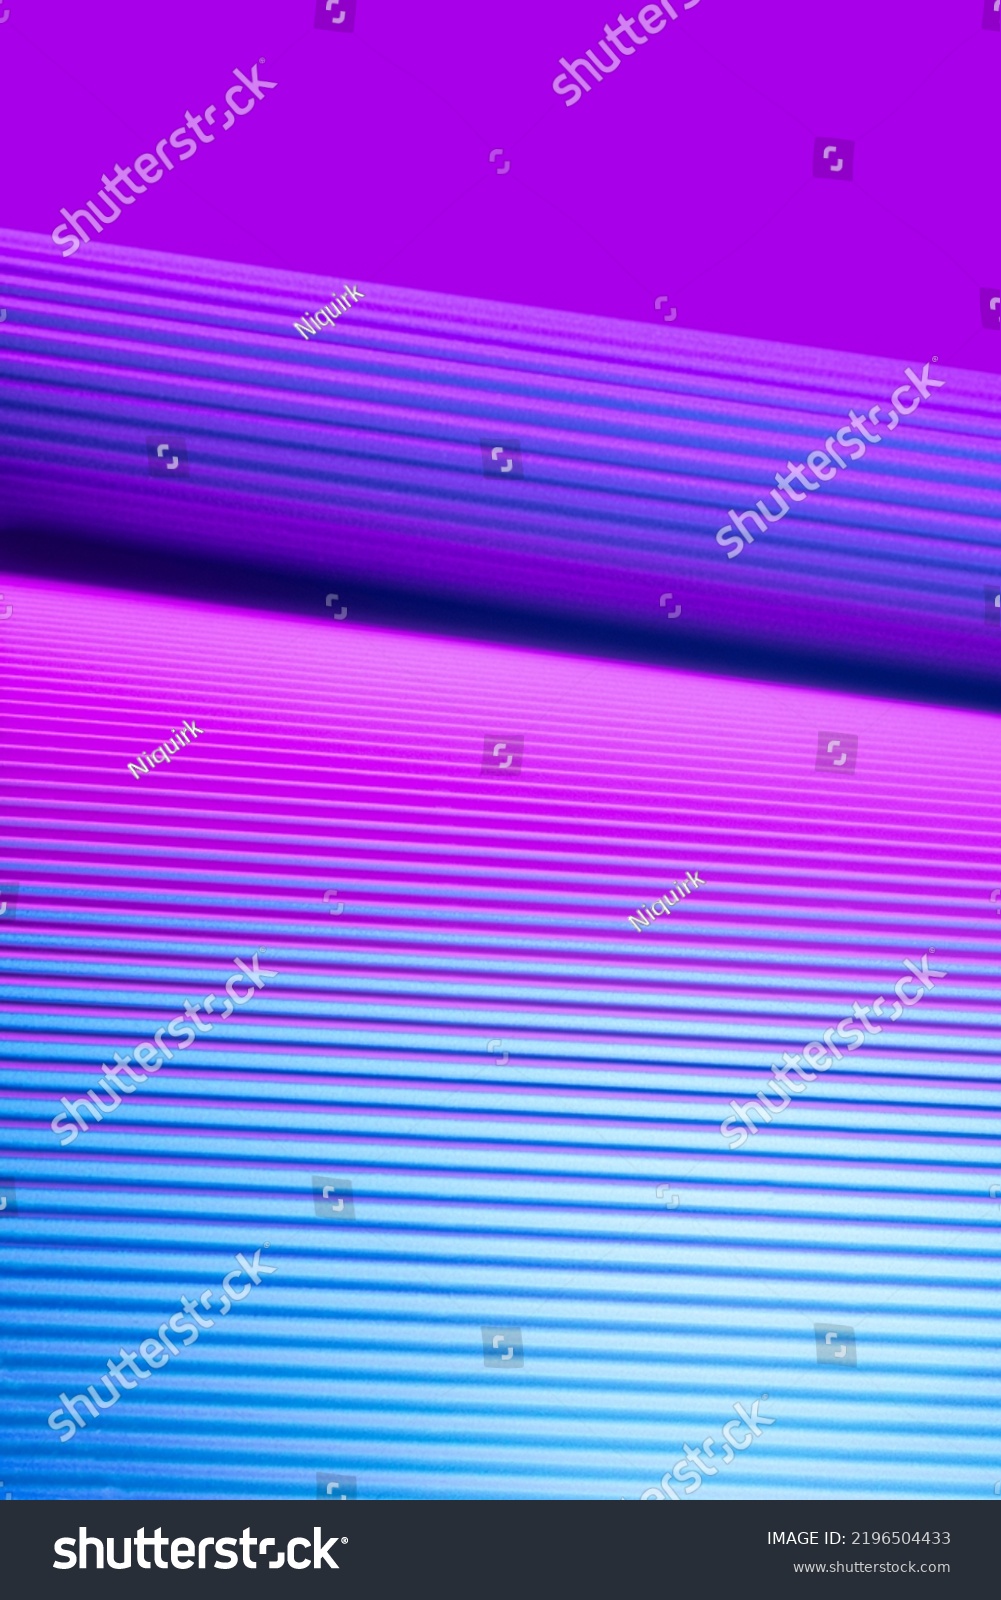 Violet and pink illuminated corrugated shapes. Geometric abstract background. #2196504433